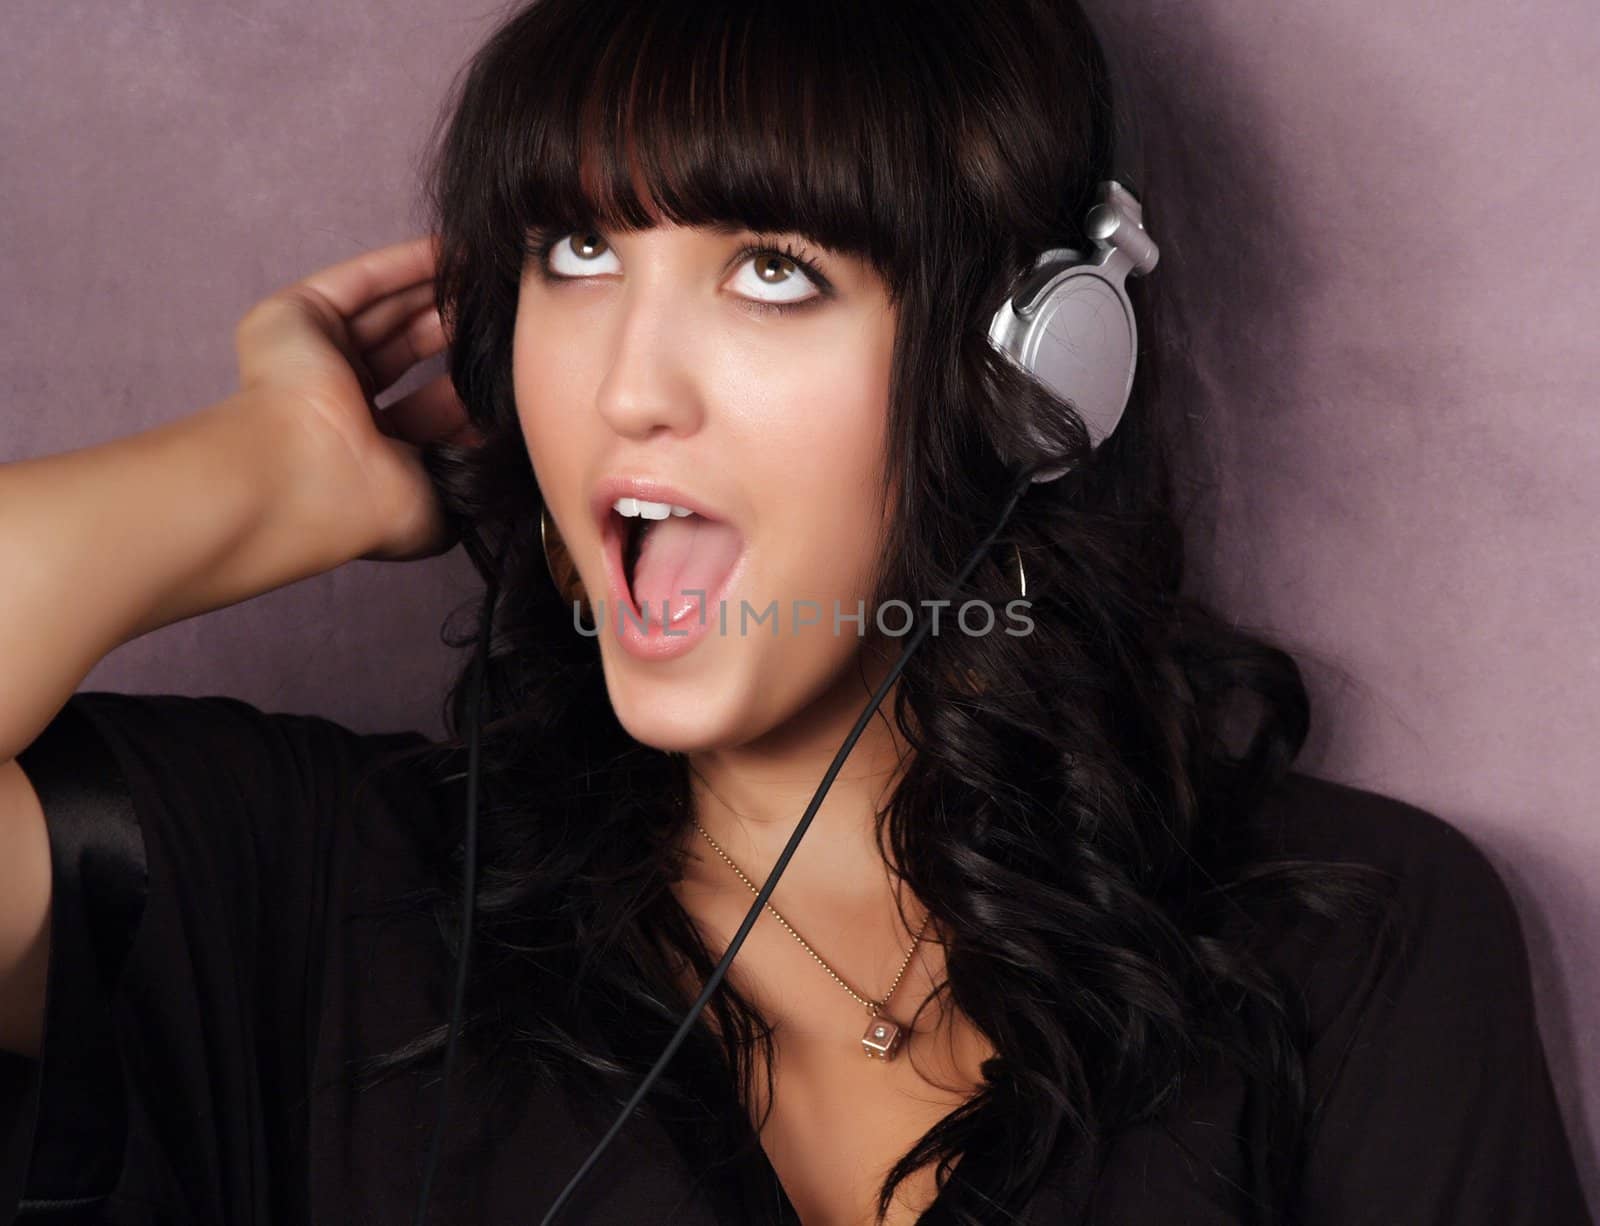 portrait of a young pretty woman listening music